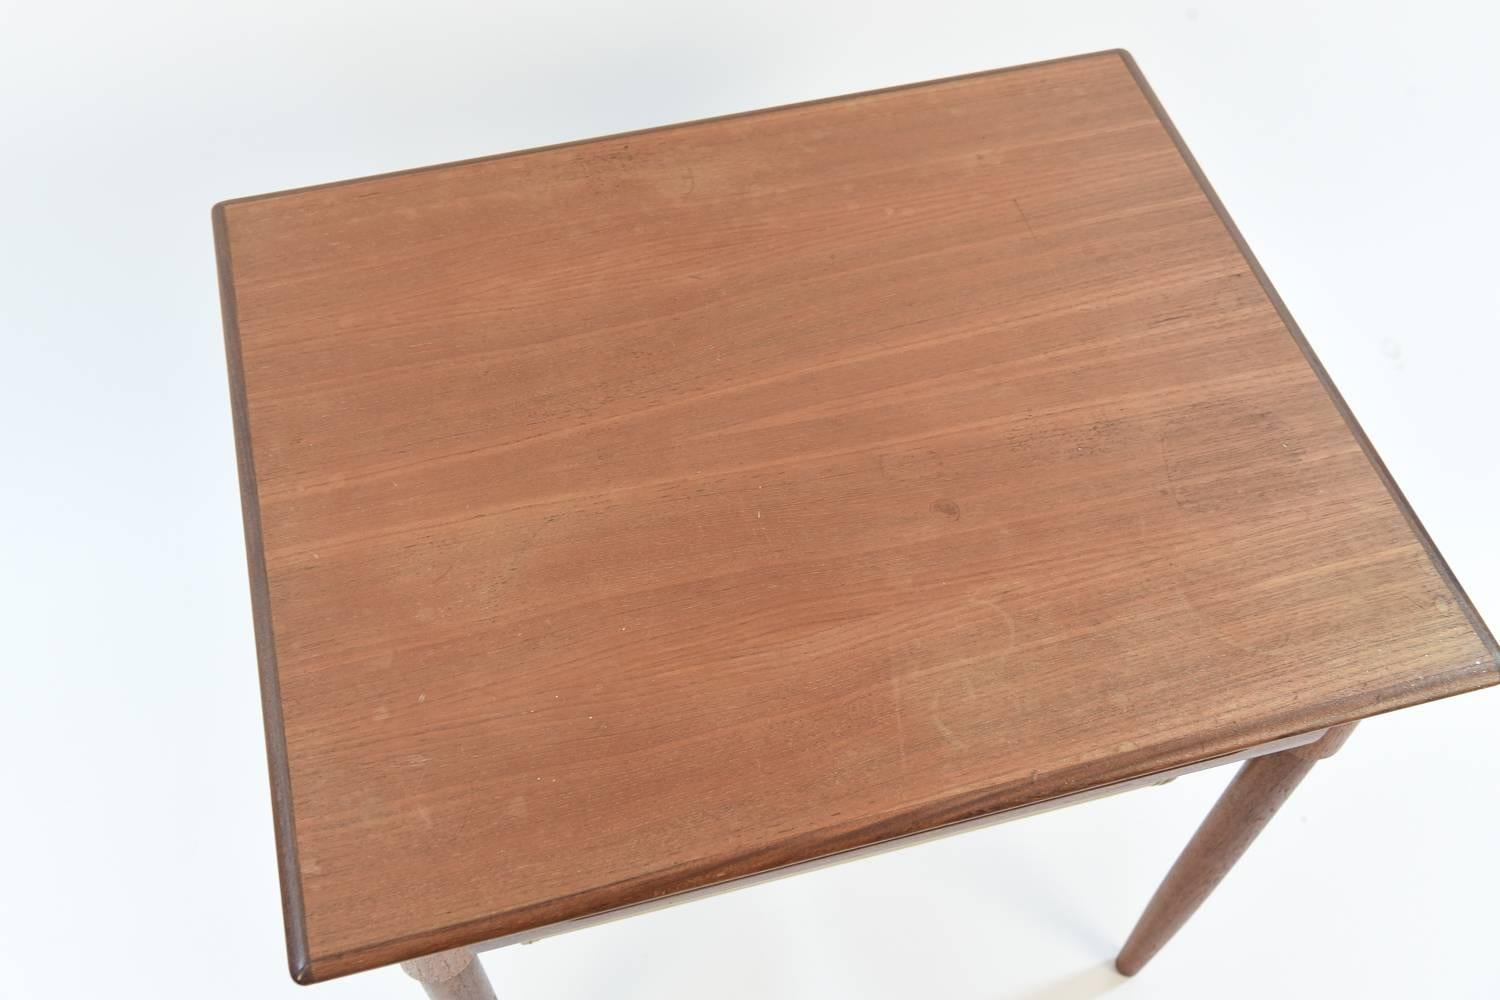 This is a fabulous Norwegian midcentury teak sewing table. Great compartment underneath for storage. Would work wonderfully for apartment living.